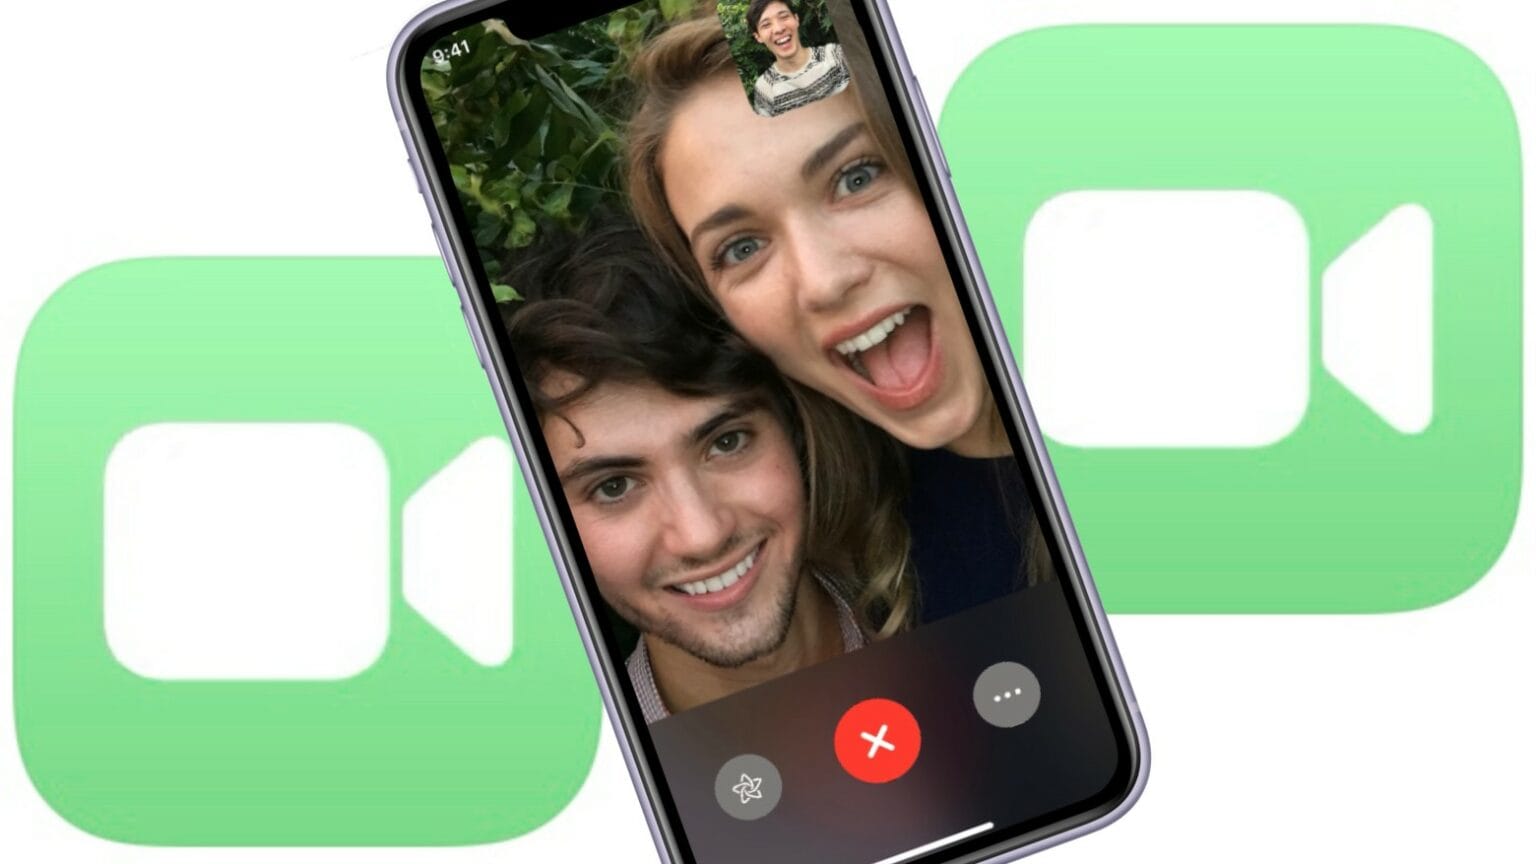 FaceTime is better with high-definition calls